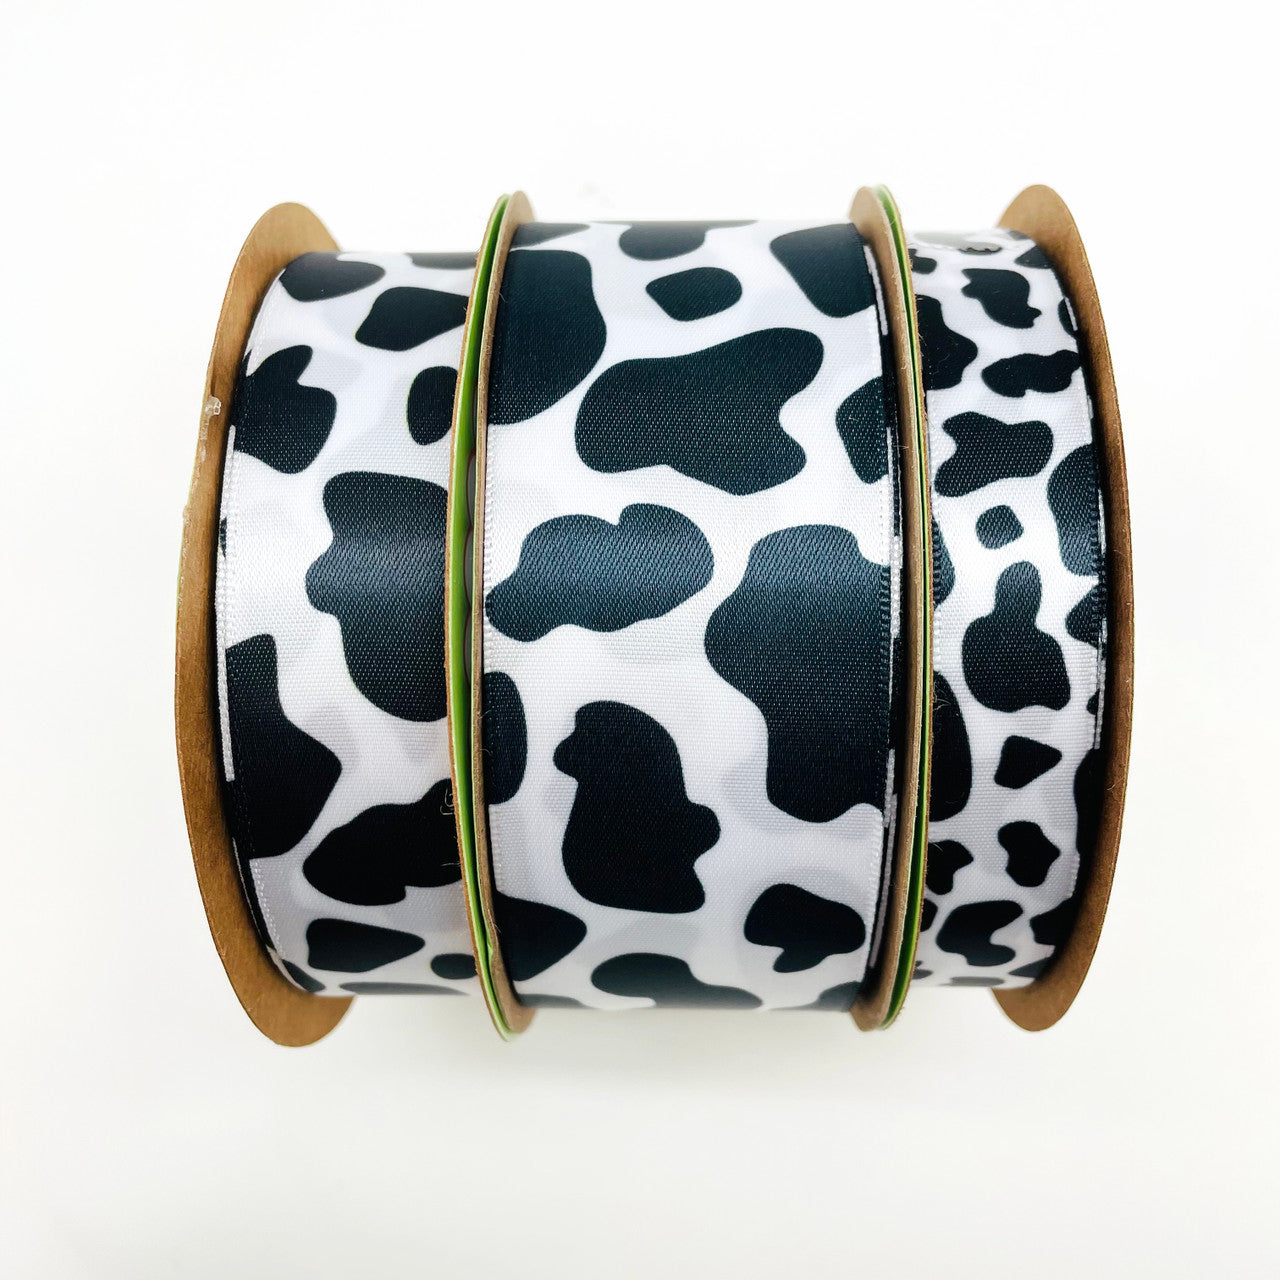 Tigeen 6 Rolls 30 Yards Cow Print Ribbon Wired Edge Black and White Striped  Dot Wrapping Ribbons Animal Print Ribbon Pink Strawberry Cow Ribbons for